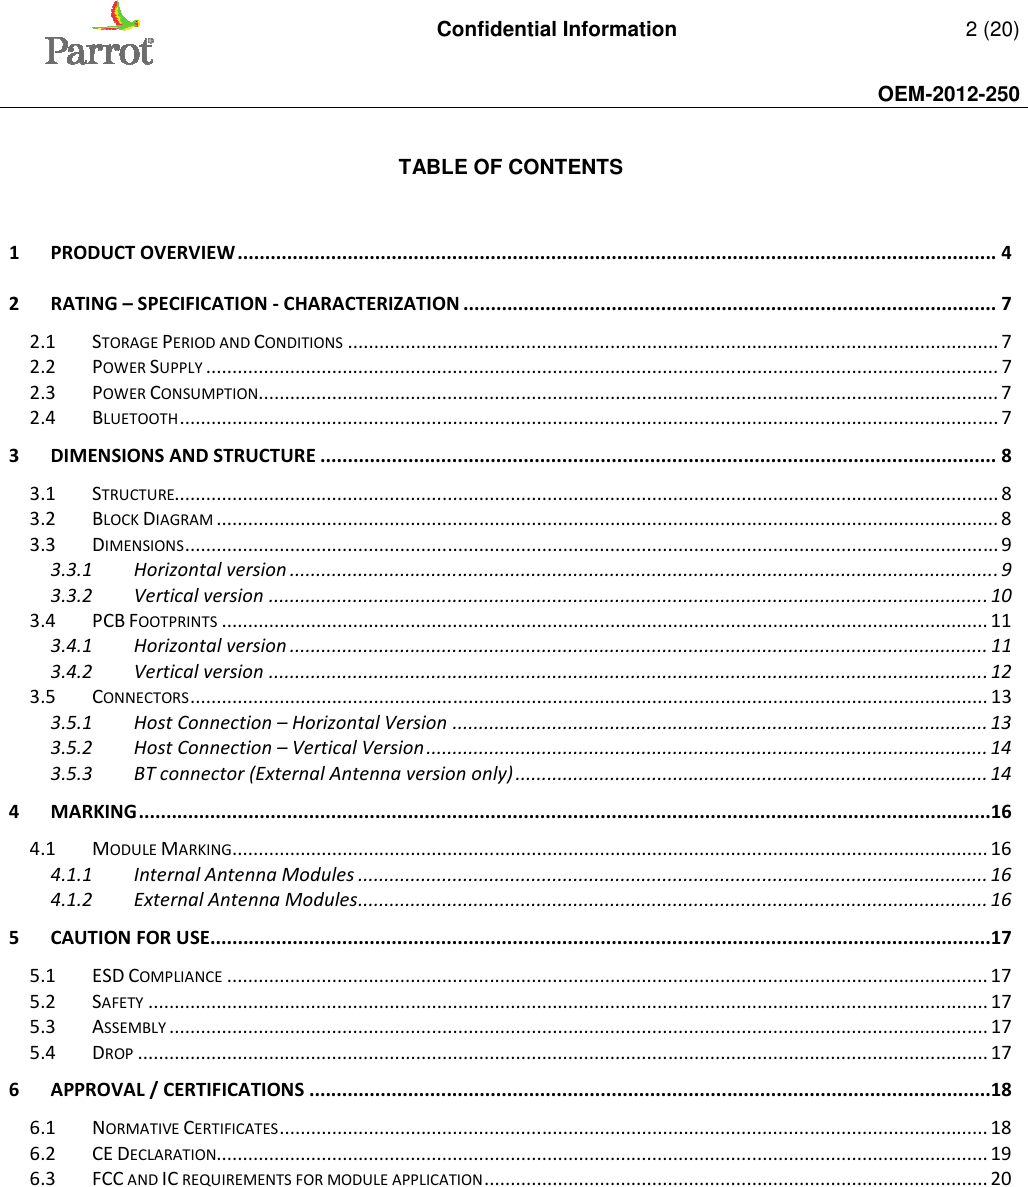   Confidential Information   2 (20)     OEM-2012-250     TABLE OF CONTENTS   1 PRODUCT OVERVIEW .......................................................................................................................................... 4 2 RATING – SPECIFICATION - CHARACTERIZATION ................................................................................................. 7 2.1 STORAGE PERIOD AND CONDITIONS ............................................................................................................................ 7 2.2 POWER SUPPLY ....................................................................................................................................................... 7 2.3 POWER CONSUMPTION ............................................................................................................................................. 7 2.4 BLUETOOTH ............................................................................................................................................................ 7 3 DIMENSIONS AND STRUCTURE ........................................................................................................................... 8 3.1 STRUCTURE............................................................................................................................................................. 8 3.2 BLOCK DIAGRAM ..................................................................................................................................................... 8 3.3 DIMENSIONS ........................................................................................................................................................... 9 3.3.1 Horizontal version ....................................................................................................................................... 9 3.3.2 Vertical version ......................................................................................................................................... 10 3.4 PCB FOOTPRINTS .................................................................................................................................................. 11 3.4.1 Horizontal version ..................................................................................................................................... 11 3.4.2 Vertical version ......................................................................................................................................... 12 3.5 CONNECTORS ........................................................................................................................................................ 13 3.5.1 Host Connection – Horizontal Version ...................................................................................................... 13 3.5.2 Host Connection – Vertical Version ........................................................................................................... 14 3.5.3 BT connector (External Antenna version only) .......................................................................................... 14 4 MARKING ...........................................................................................................................................................16 4.1 MODULE MARKING ................................................................................................................................................ 16 4.1.1 Internal Antenna Modules ........................................................................................................................ 16 4.1.2 External Antenna Modules ........................................................................................................................ 16 5 CAUTION FOR USE..............................................................................................................................................17 5.1 ESD COMPLIANCE ................................................................................................................................................. 17 5.2 SAFETY ................................................................................................................................................................ 17 5.3 ASSEMBLY ............................................................................................................................................................ 17 5.4 DROP .................................................................................................................................................................. 17 6 APPROVAL / CERTIFICATIONS ............................................................................................................................18 6.1 NORMATIVE CERTIFICATES ....................................................................................................................................... 18 6.2 CE DECLARATION................................................................................................................................................... 19 6.3 FCC AND IC REQUIREMENTS FOR MODULE APPLICATION ................................................................................................ 20  